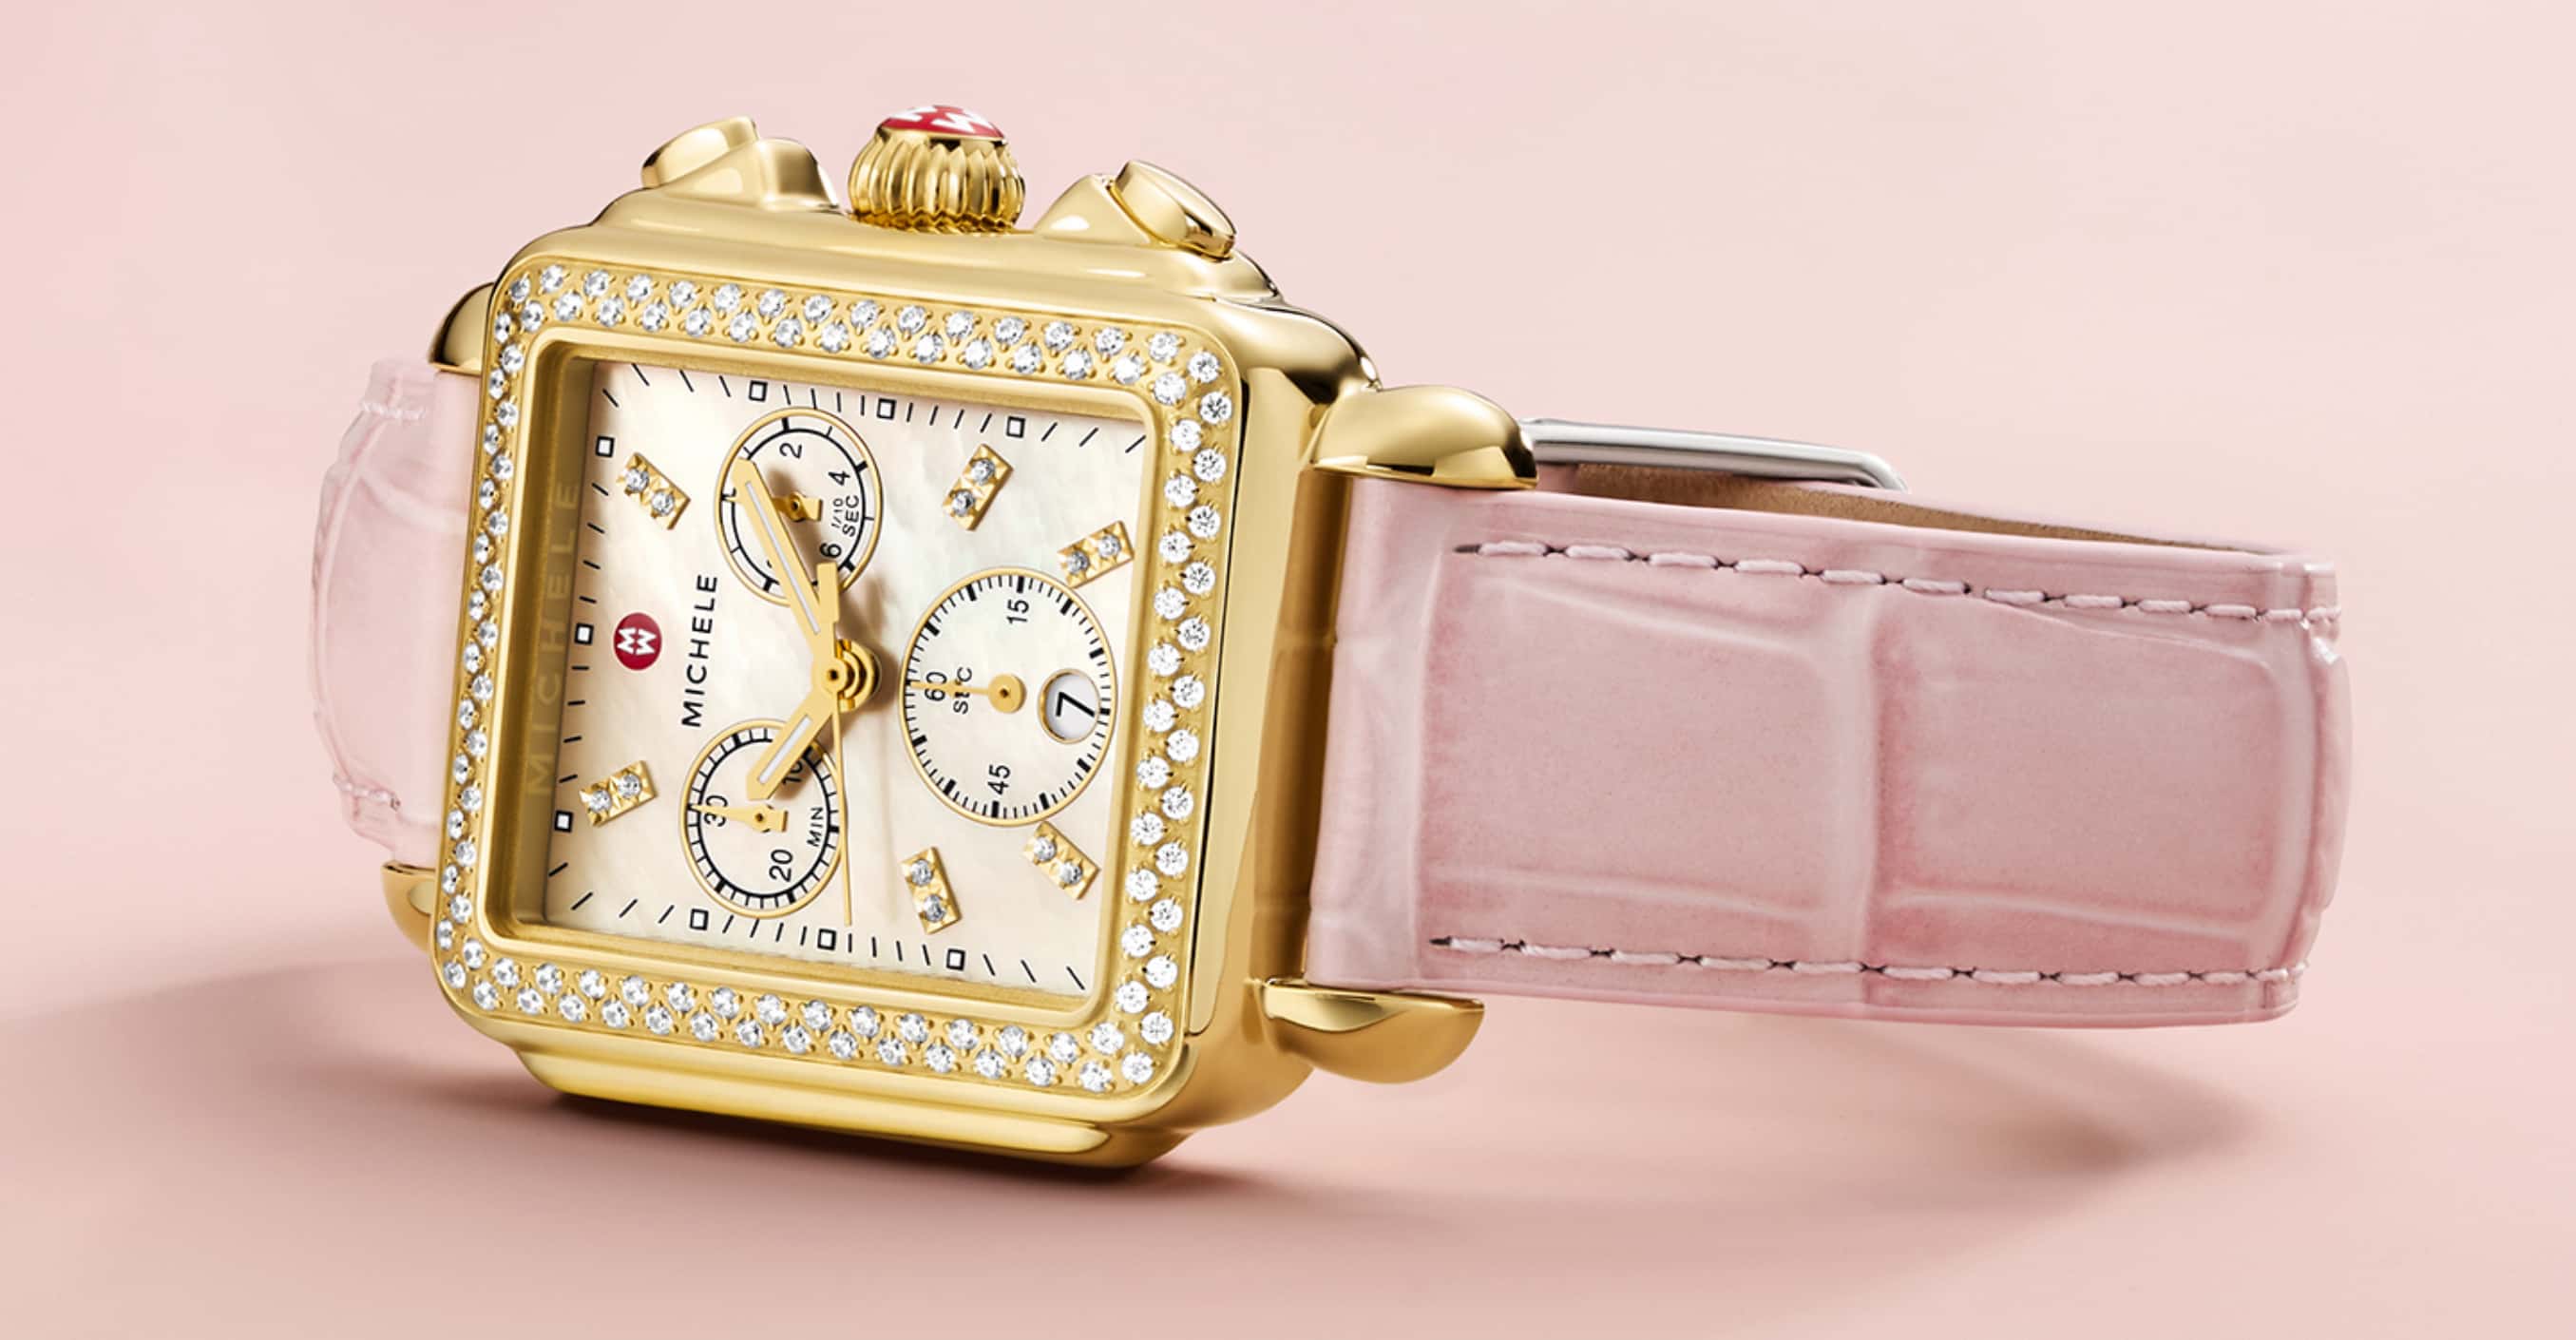 Image of a gold Michele watch with a pink strap.